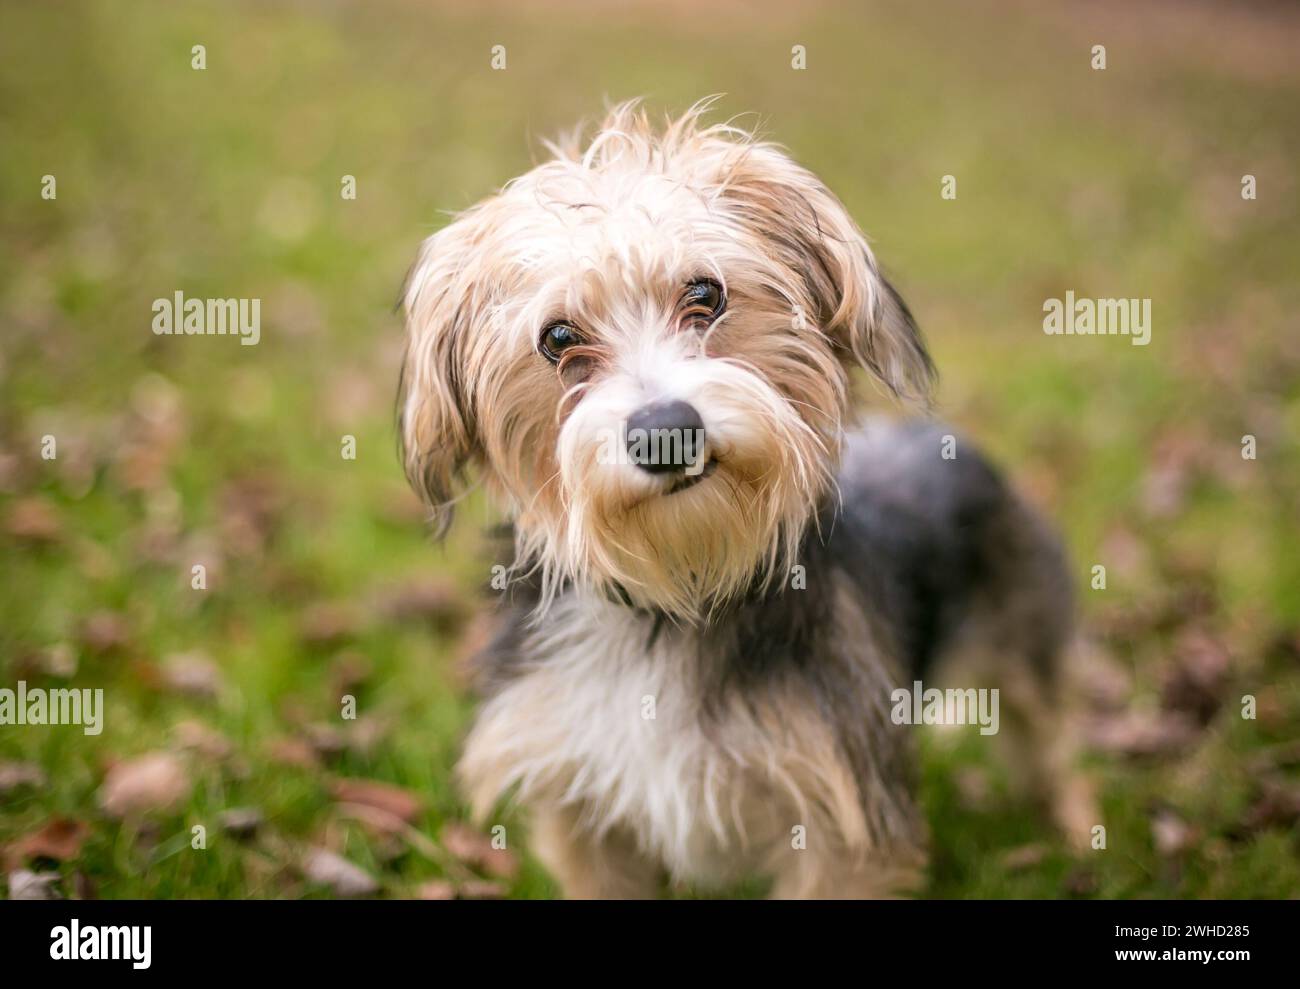 A Maltese x Yorkshire Terrier mixed breed dog, also known as a Morkie, listening with a head tilt Stock Photo